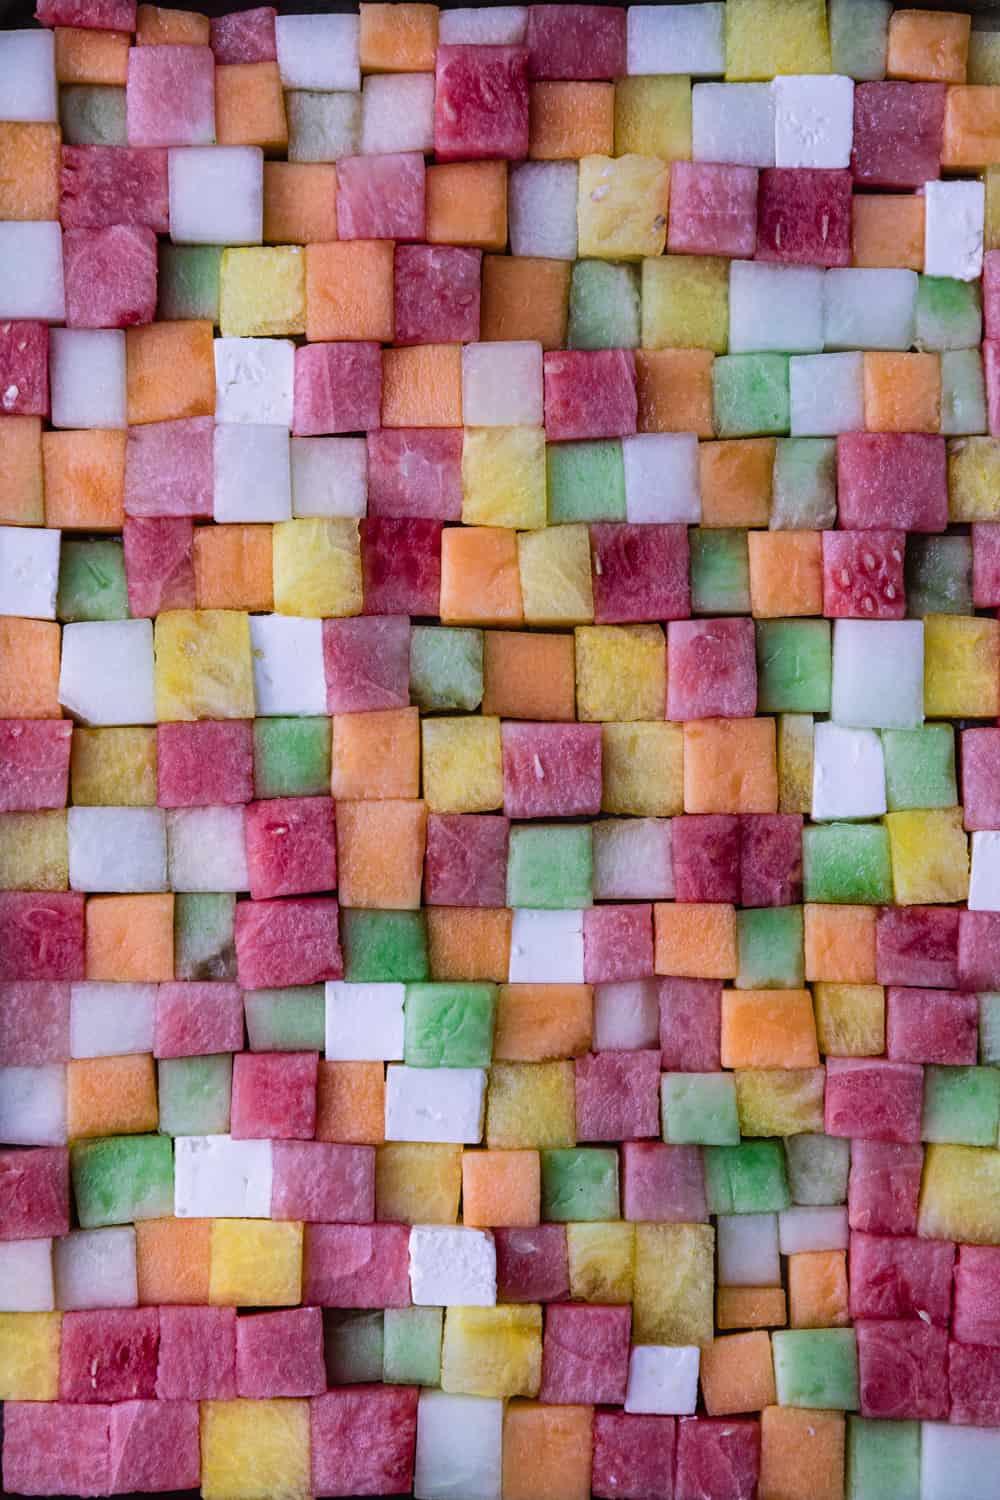 Watermelon feta salad with red, pink, orange, yellow, green and white melon and feta cut into cubes side by side.